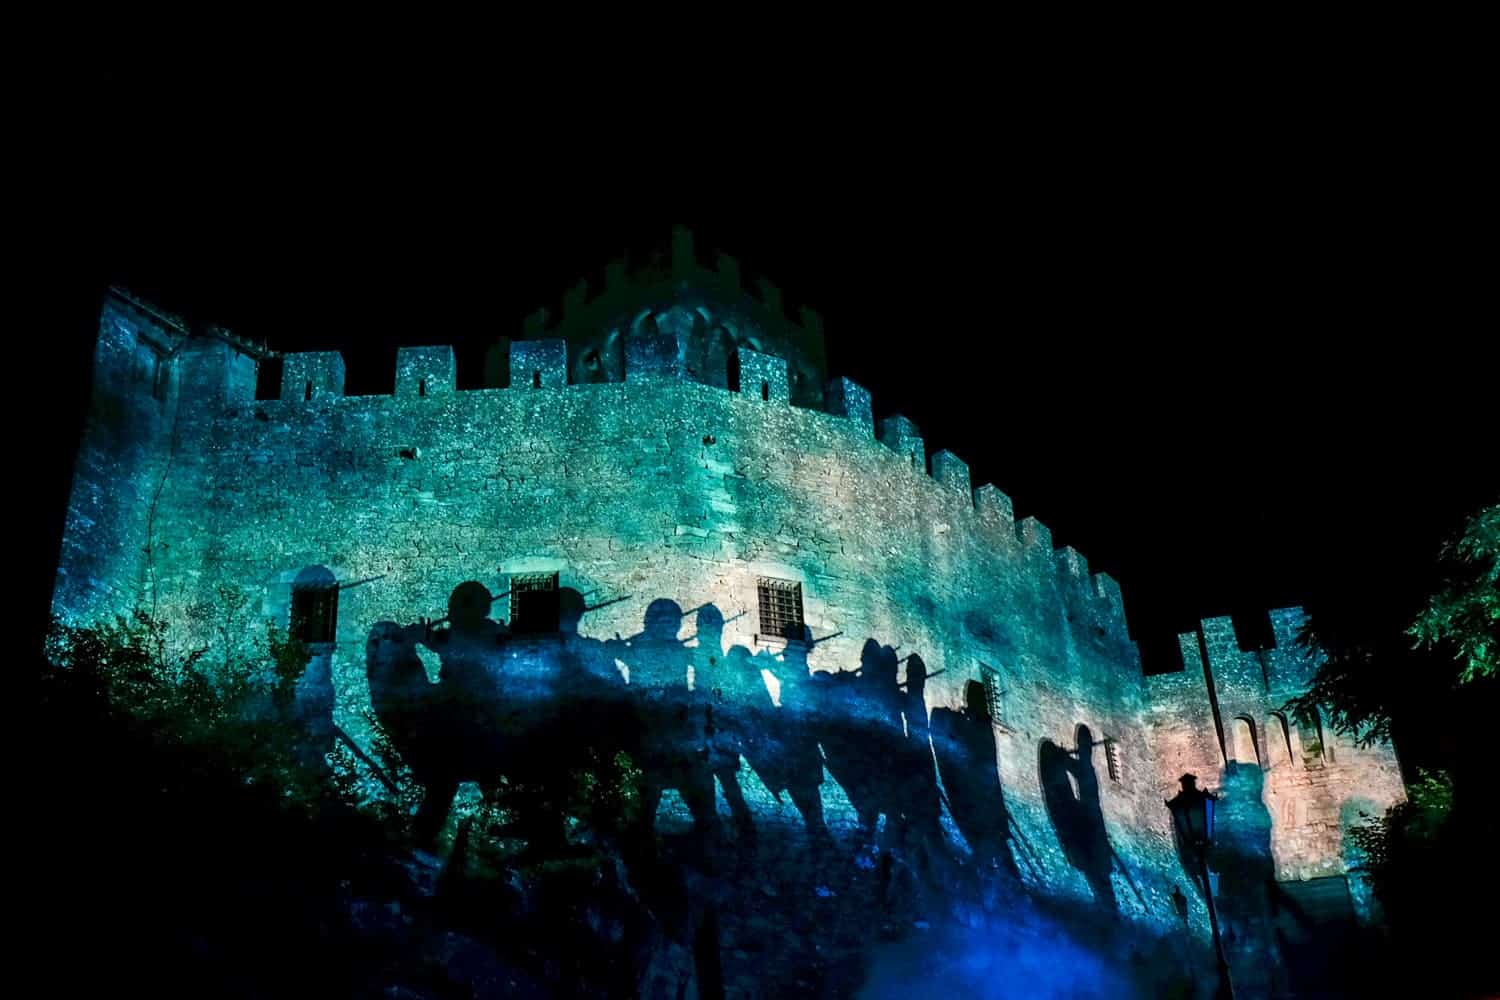 Medieval Festival in San Marino, Medieval Days Tower Light Show